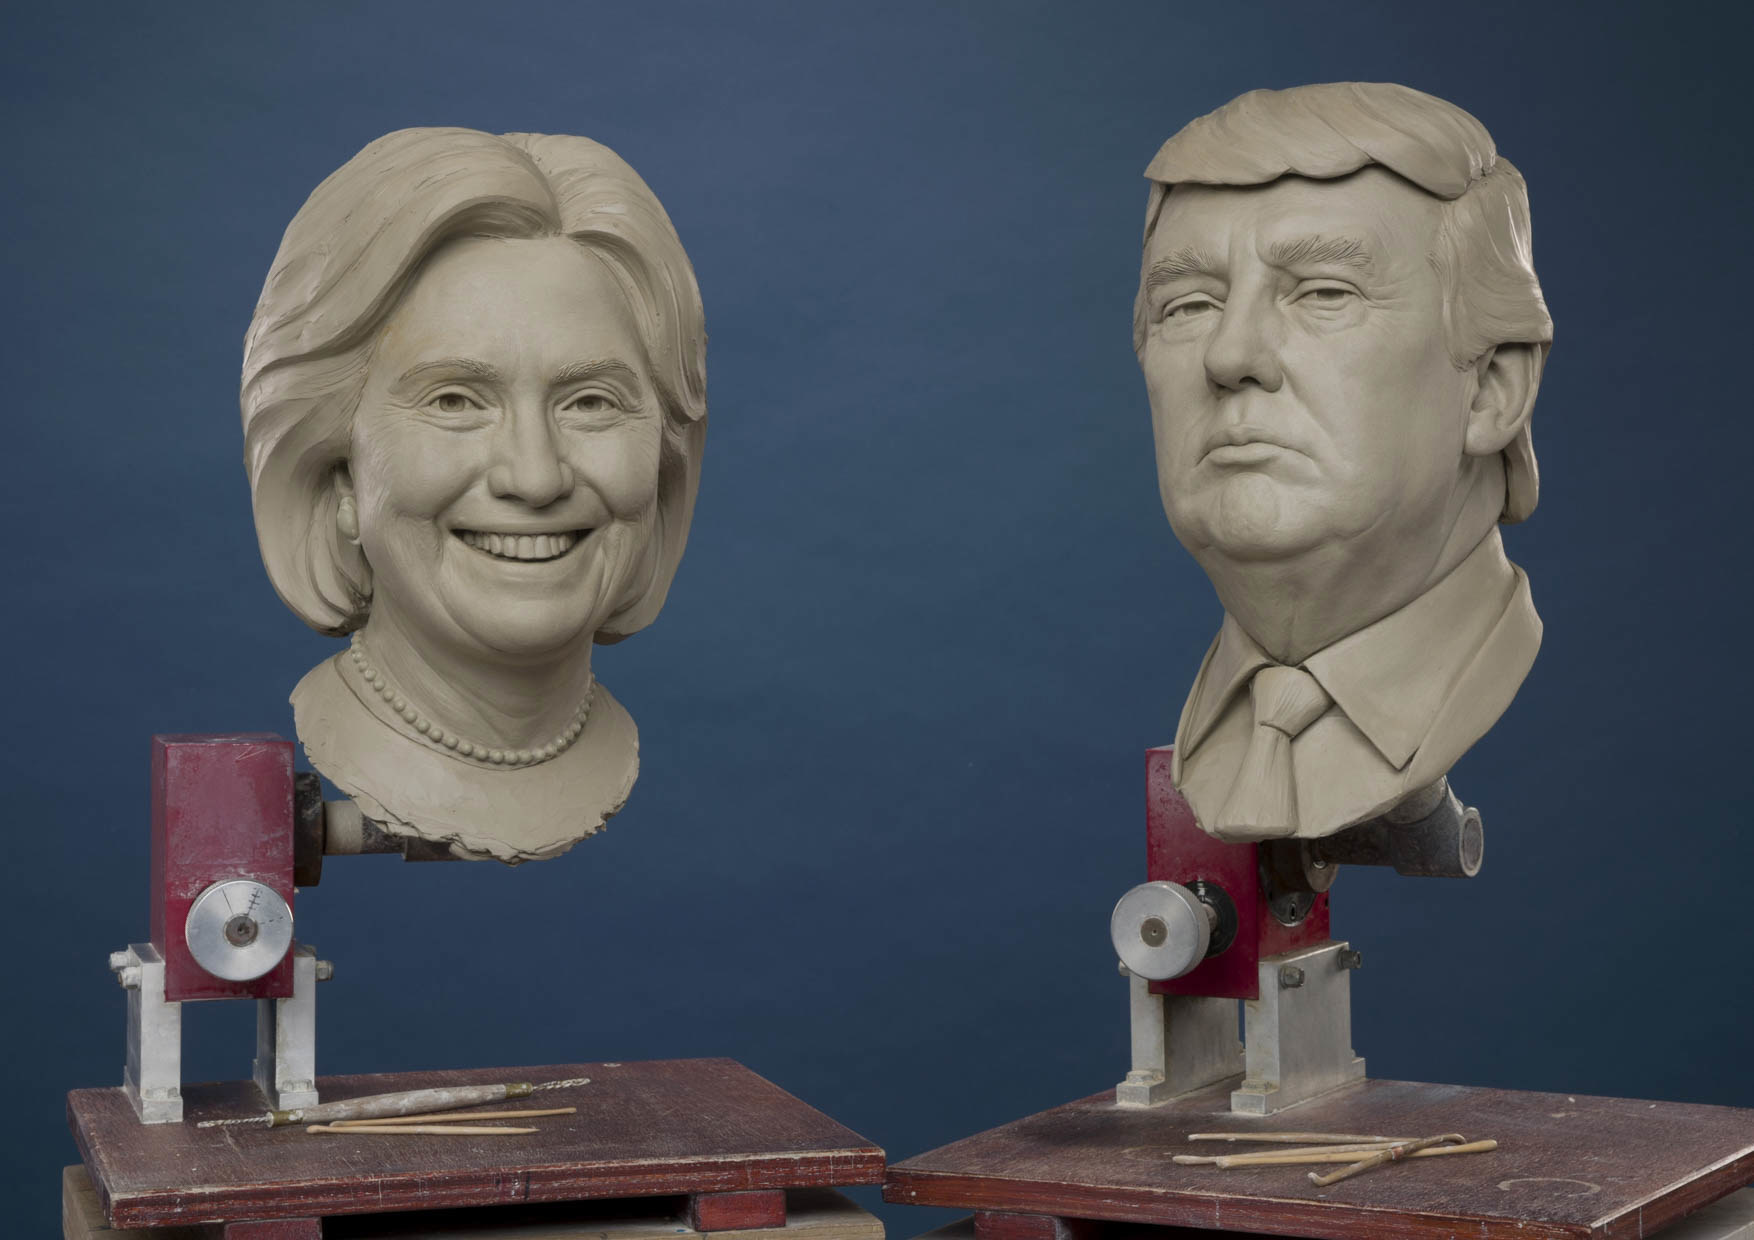 Madame Tussauds Washington, DC shares first photo of Clinton and Trump&apos;s clay head molds in the lead up to November&apos;s 2016 Election. (Courtesy PRNewsFoto/Madame Tussauds Washington, DC)